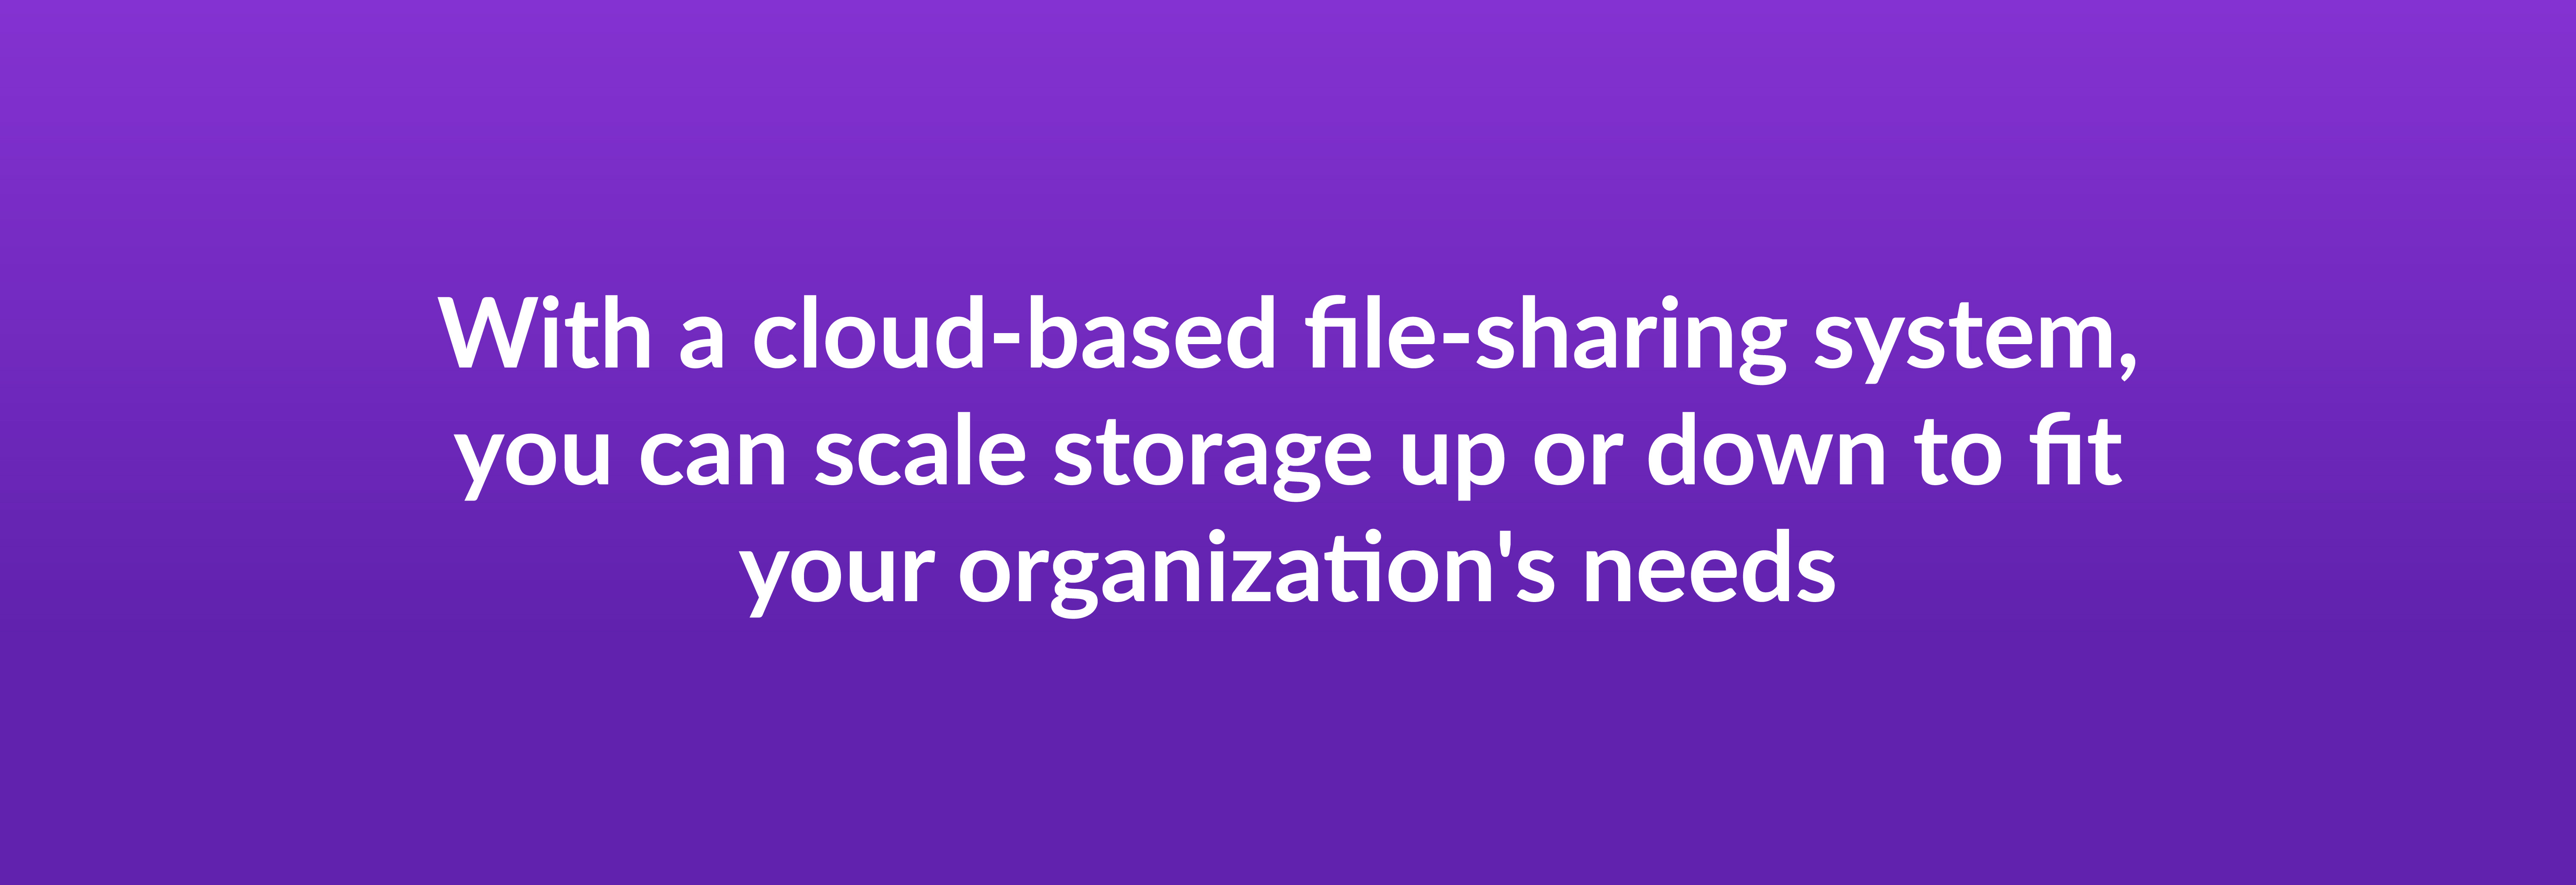 With a cloud-based file-sharing system, you can scale storage up or down to fit your organization's needs